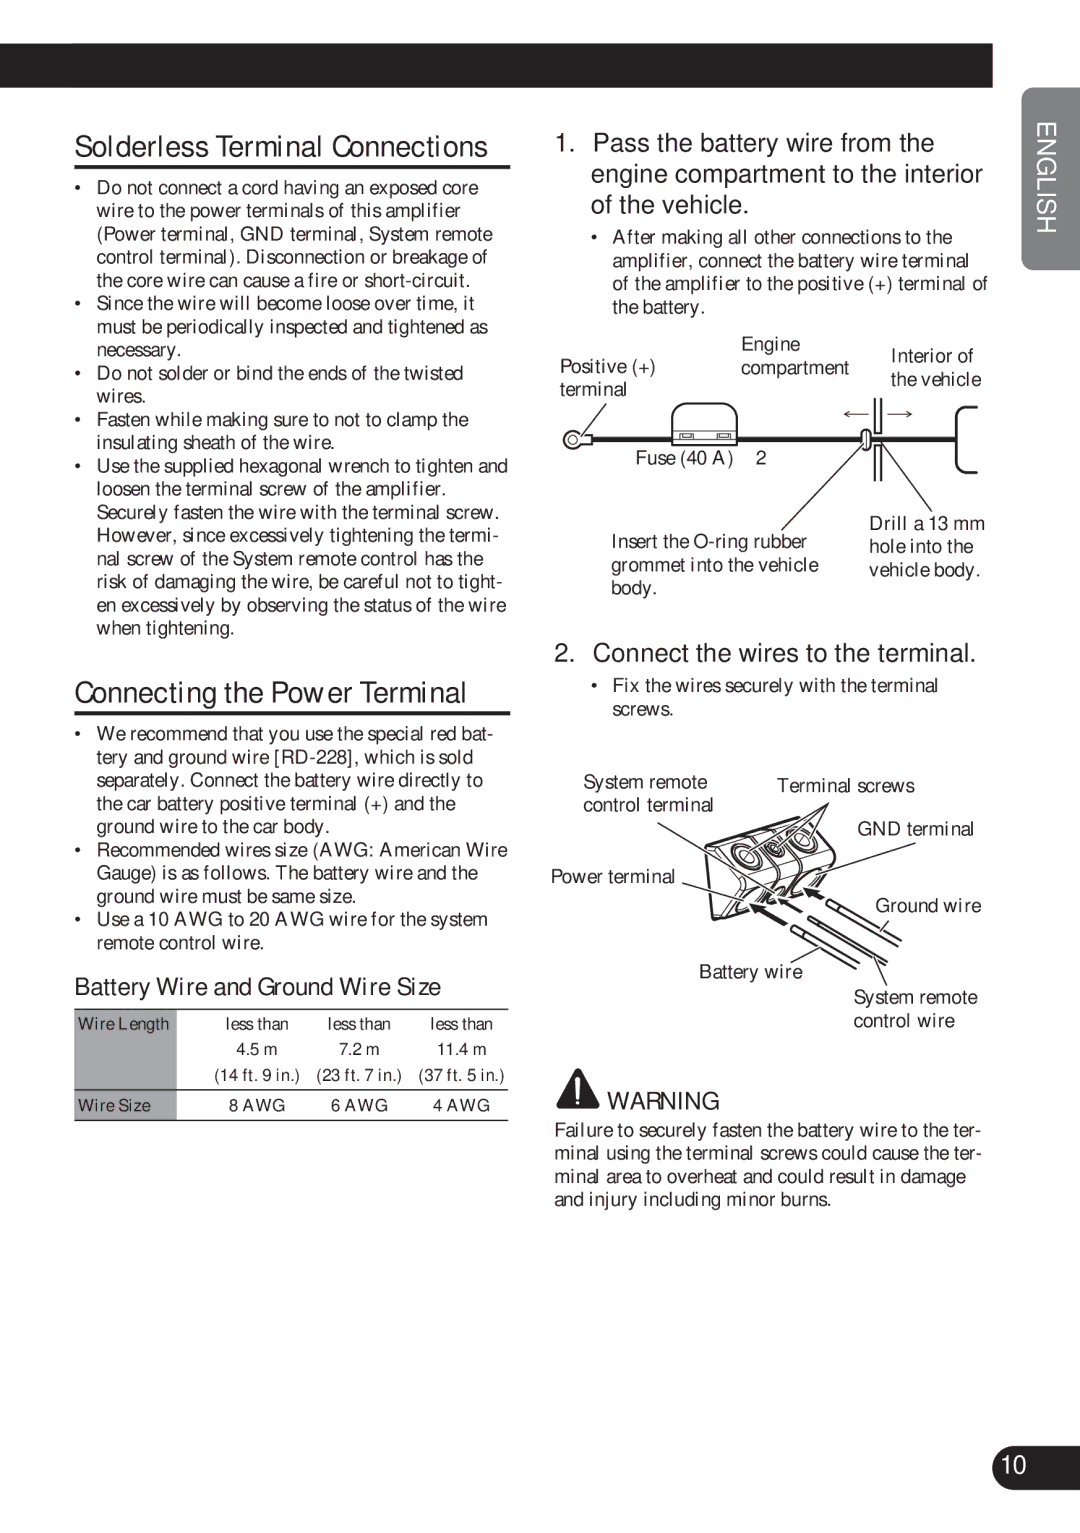 Pioneer PRS-D2200T owner manual Connecting the Power Terminal, Battery Wire and Ground Wire Size 